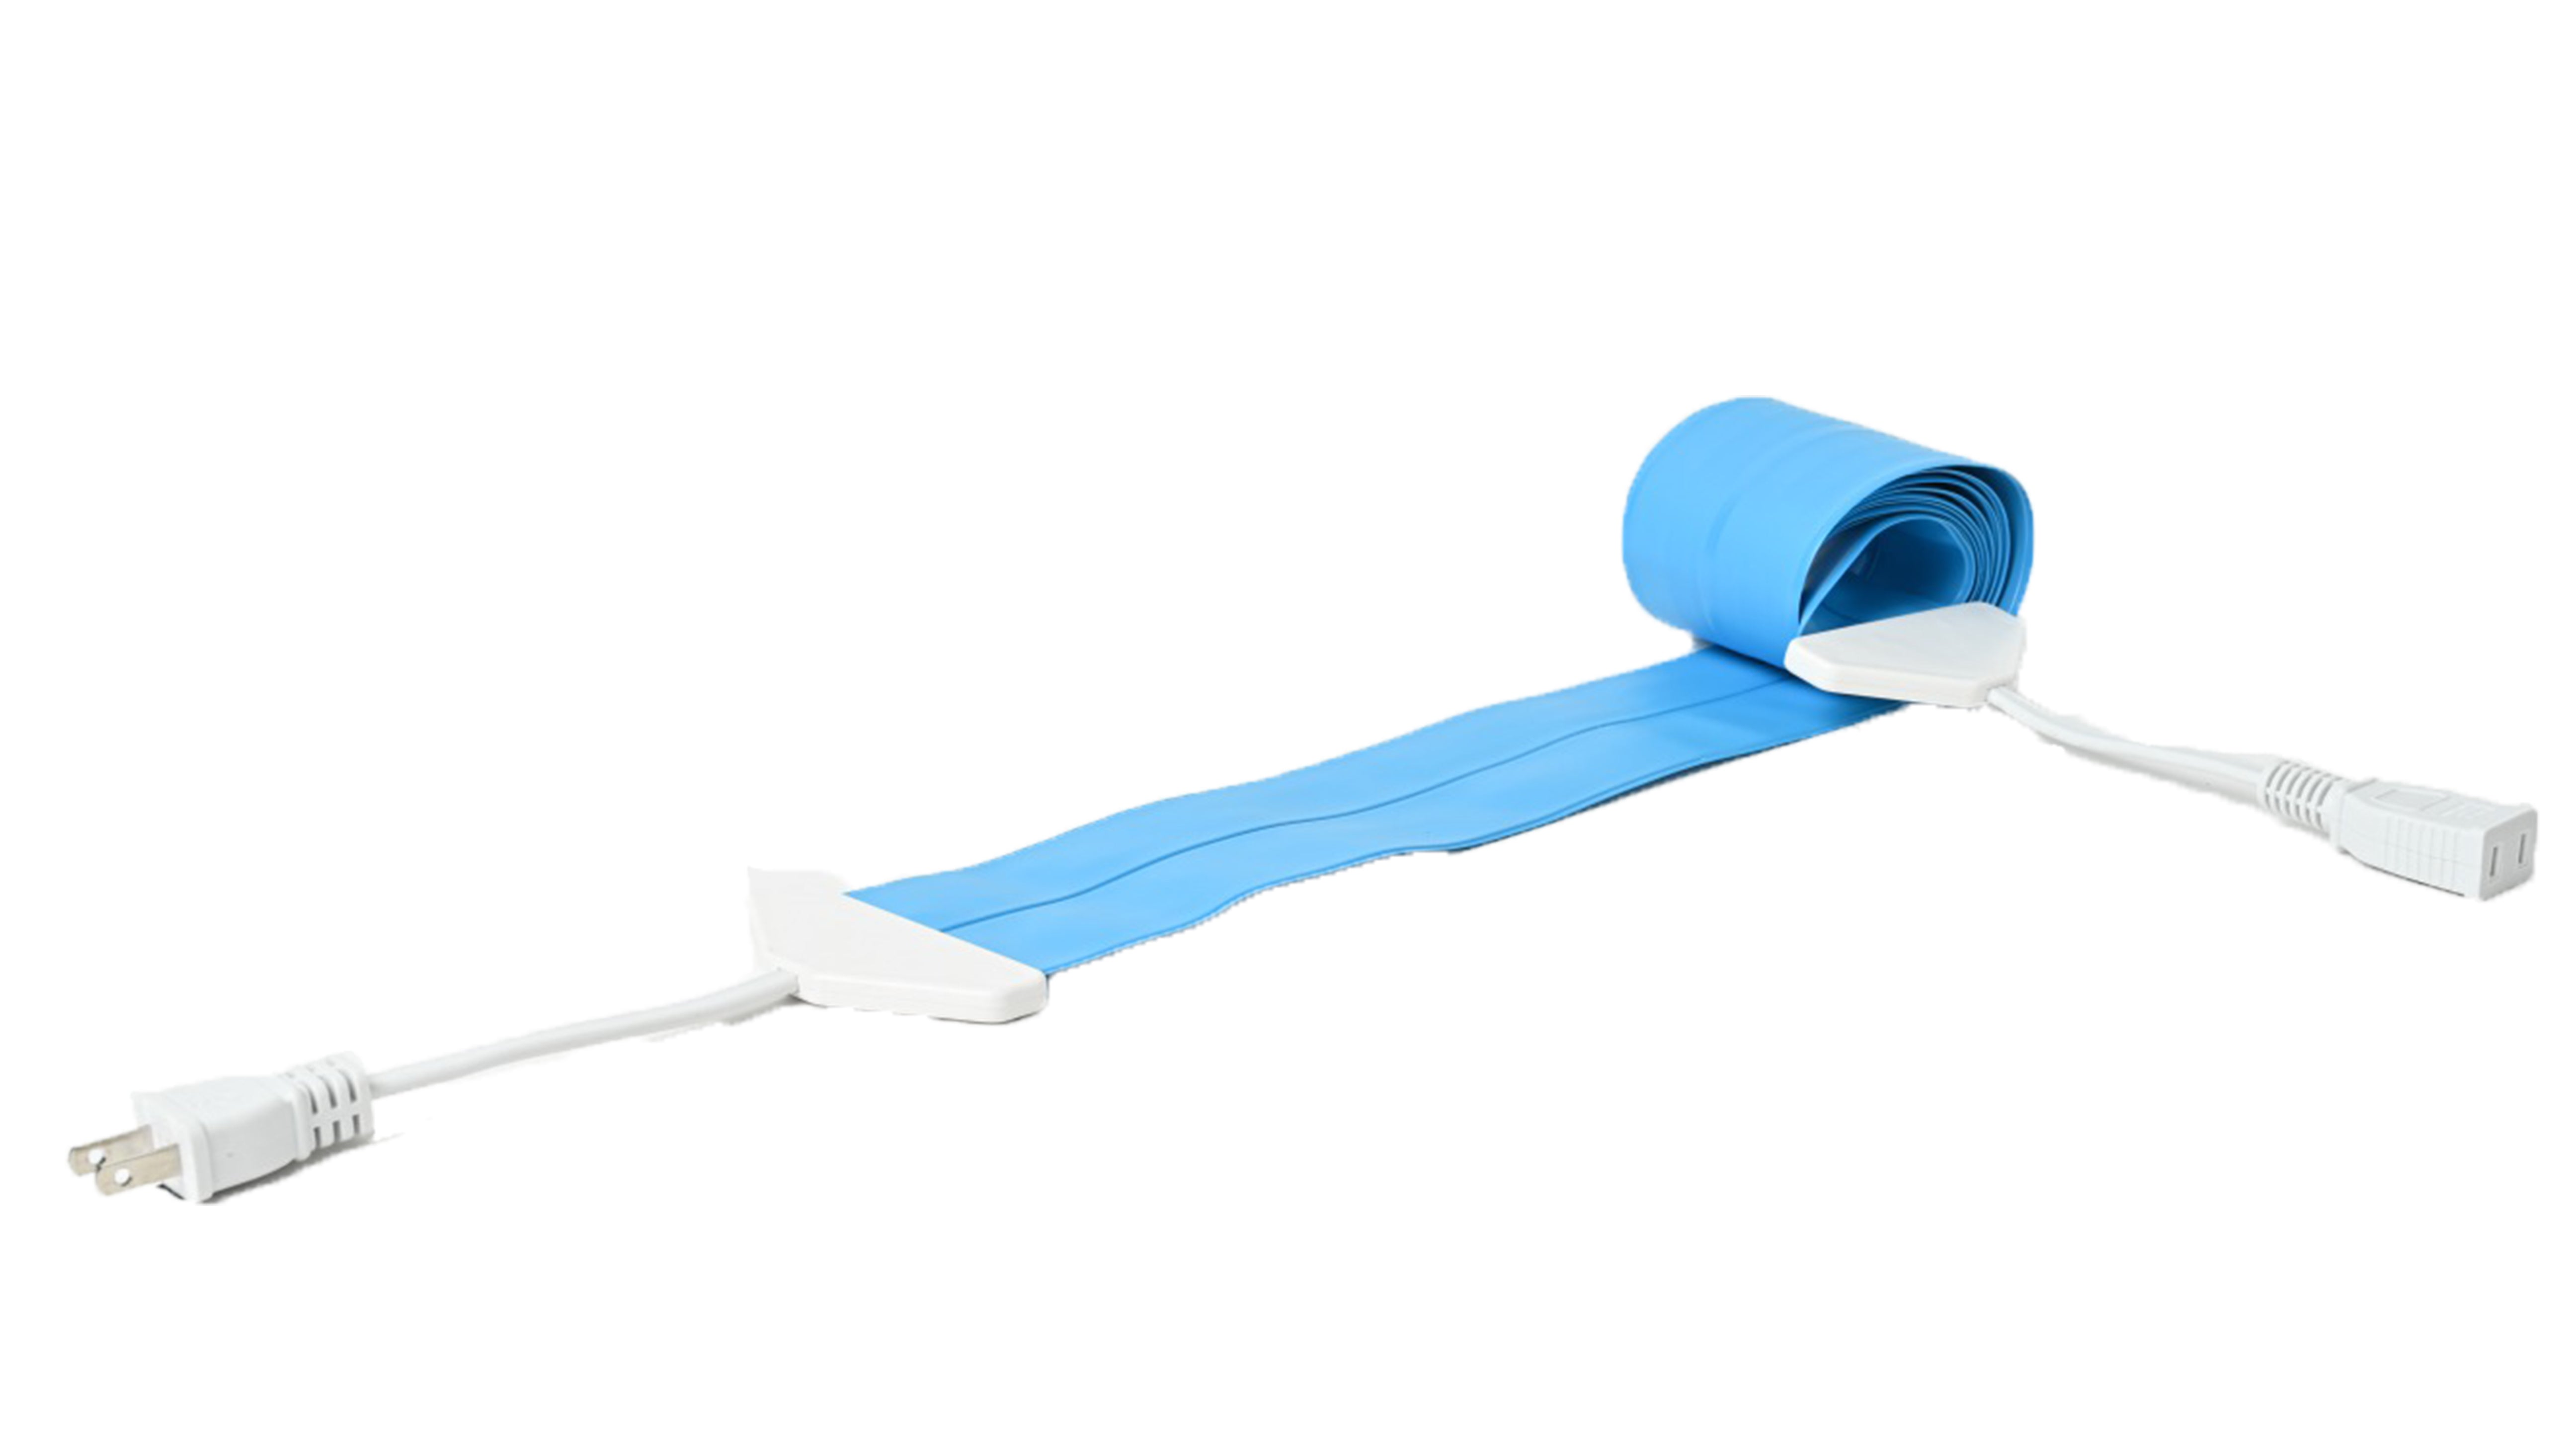 Koumeican the thinnest extension power cord in the world【Baby Blue】